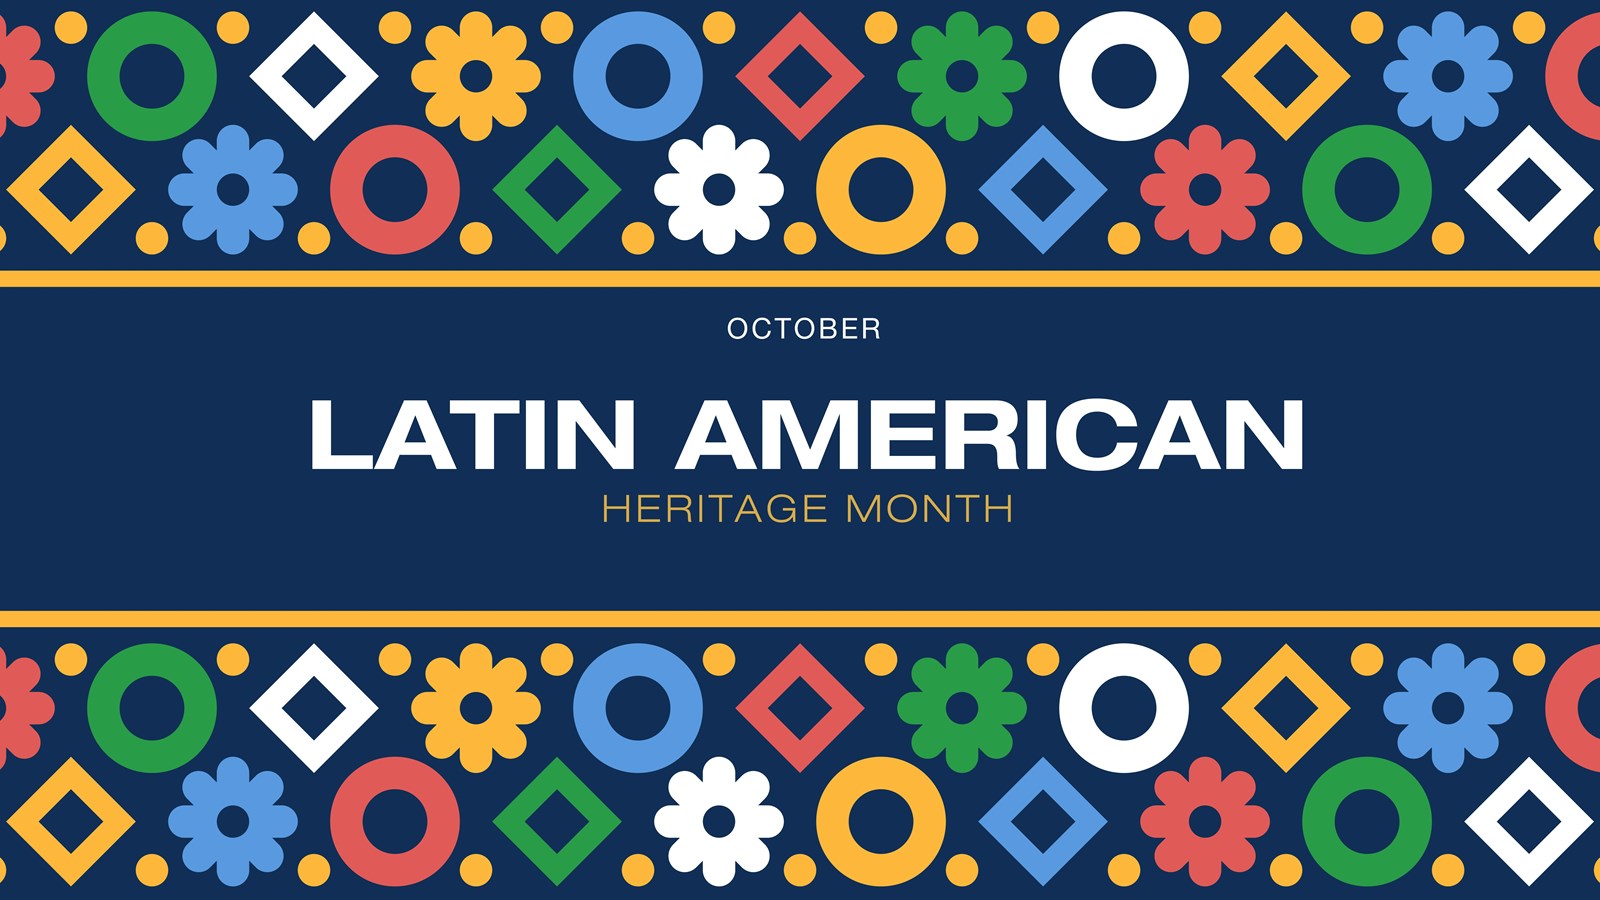 Latin American Heritage Month October